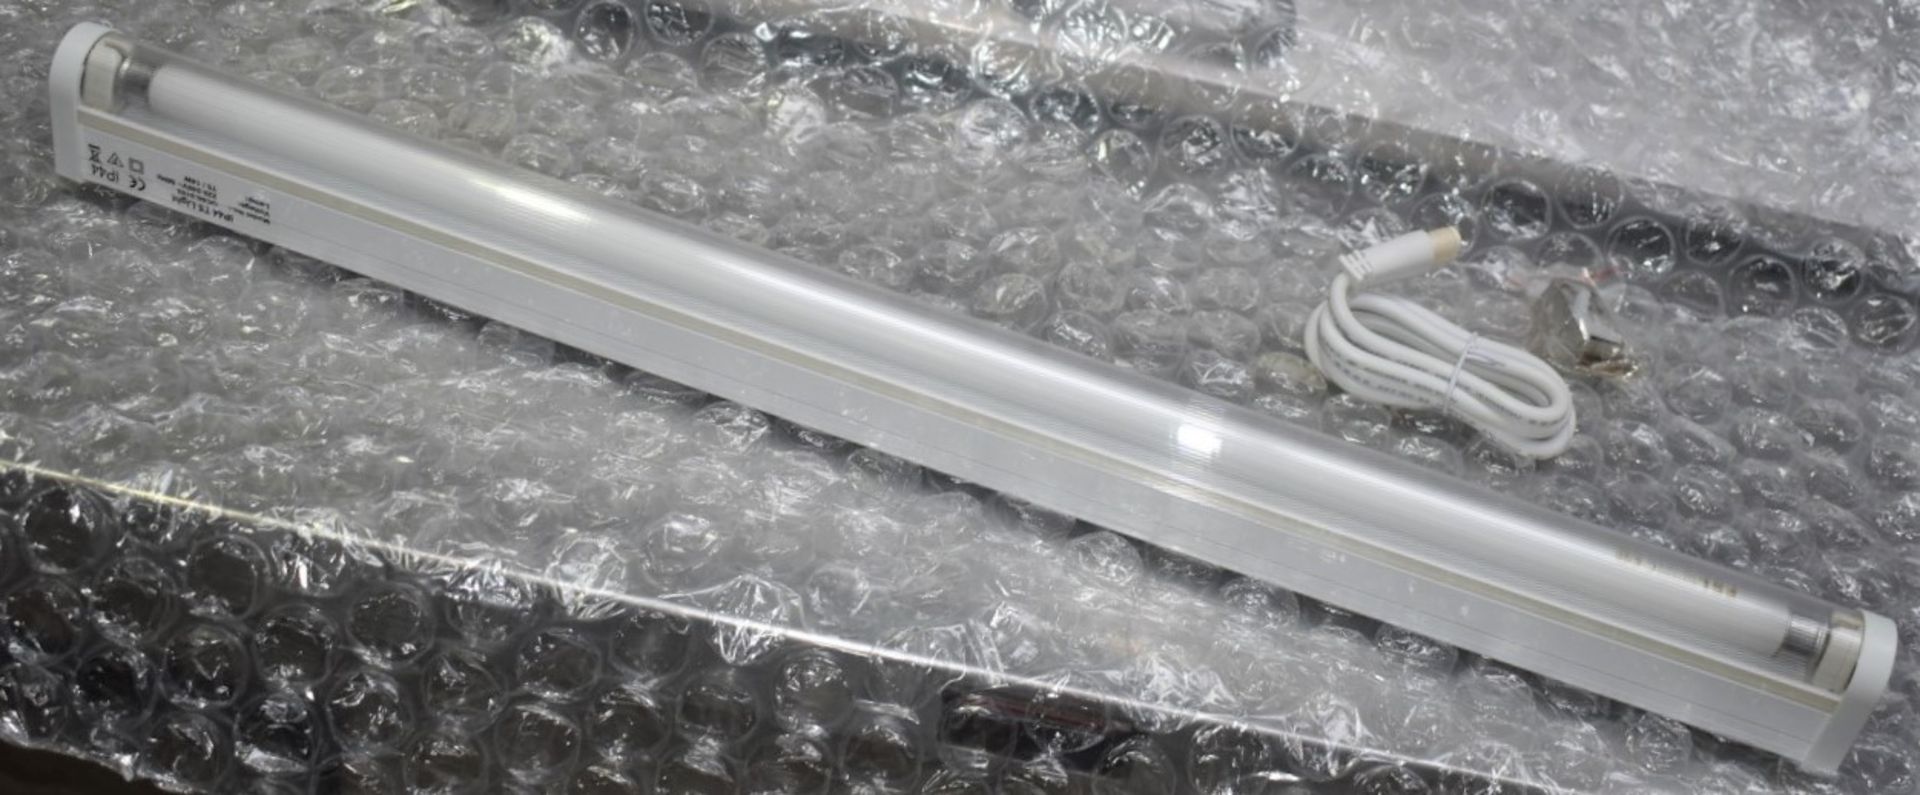 1 x Bathroom Light Fitting - IP44 Waterproof T5 14w Fluorescent Lights With Built-In Electronic - Image 3 of 11